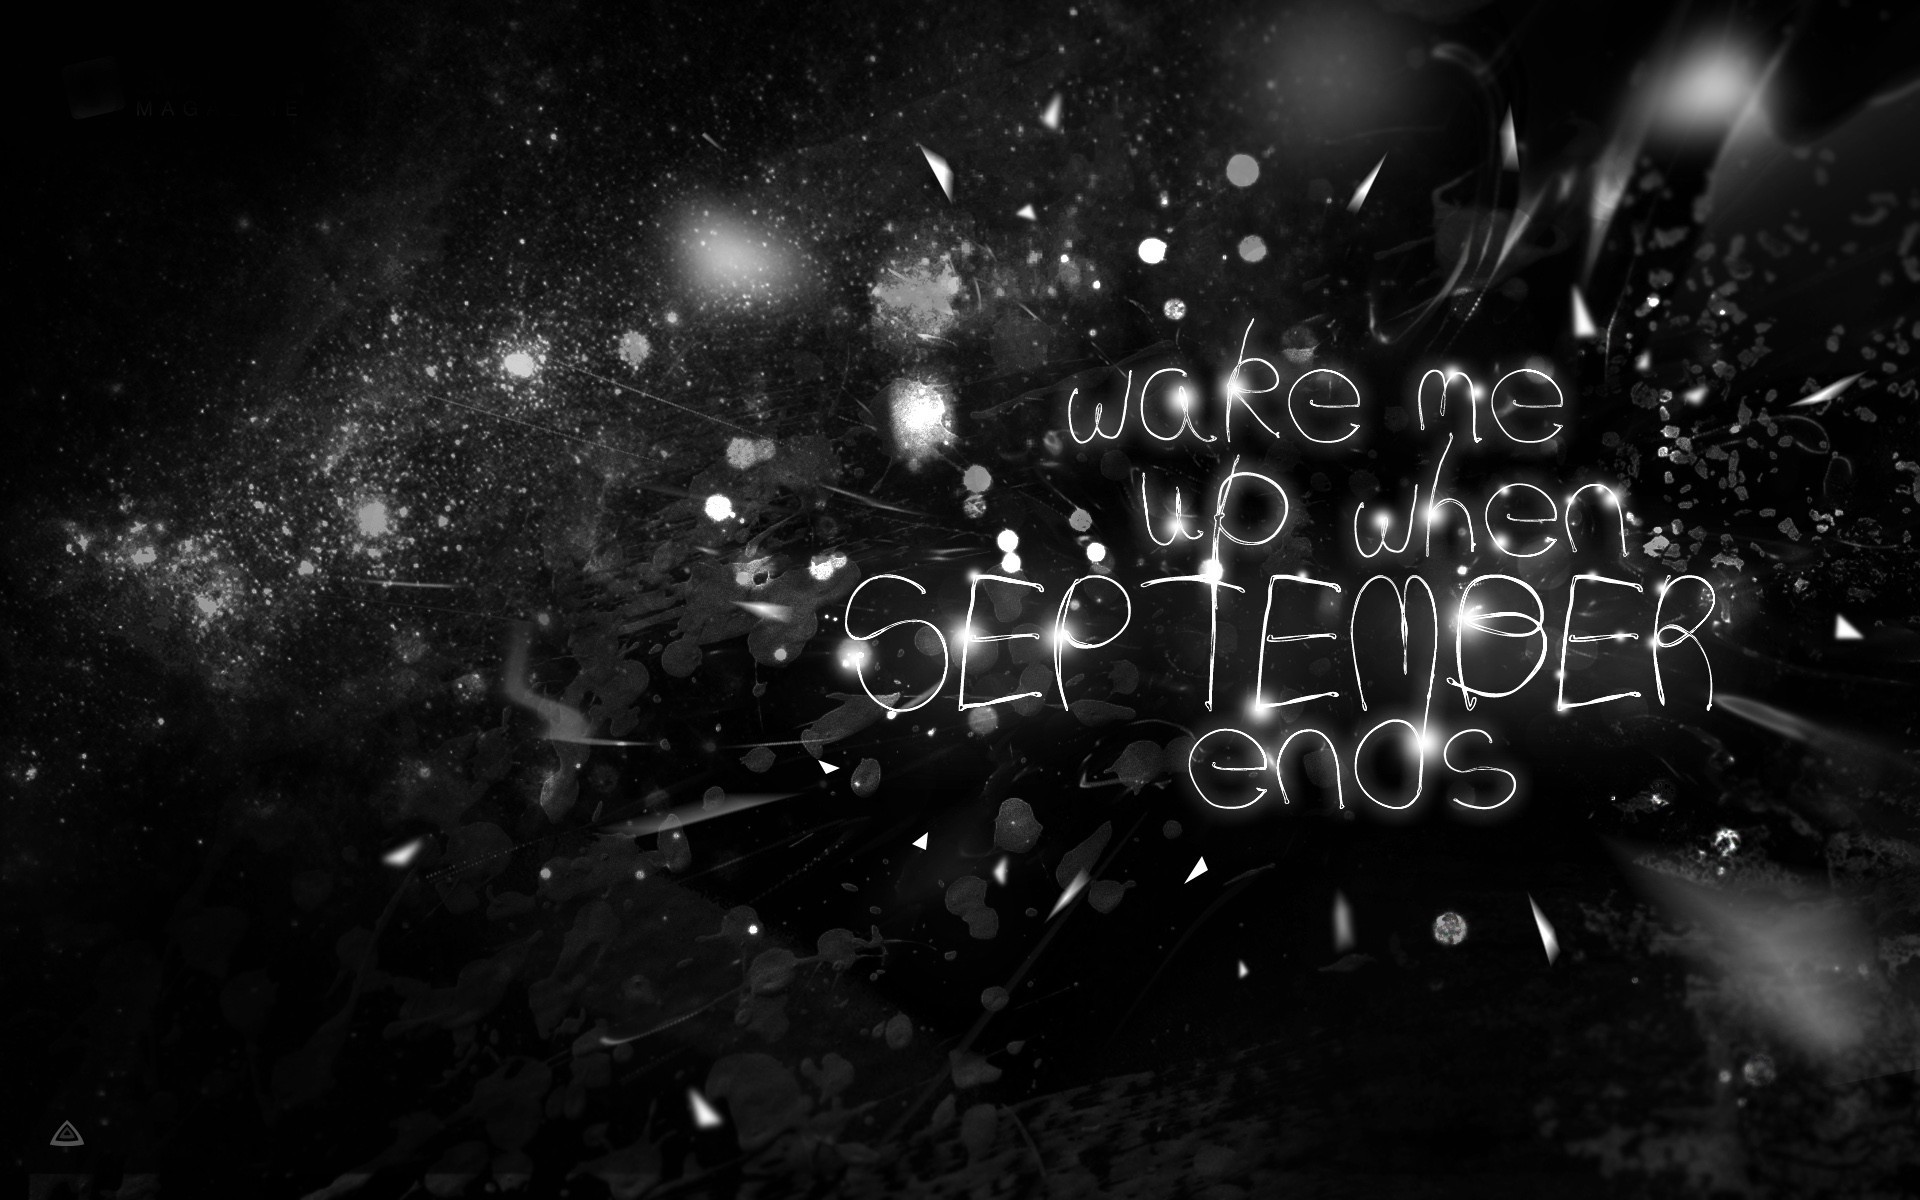 1920x1200 Green day wake me up when september ends wallpaper for ipad - girlanger  halloween images